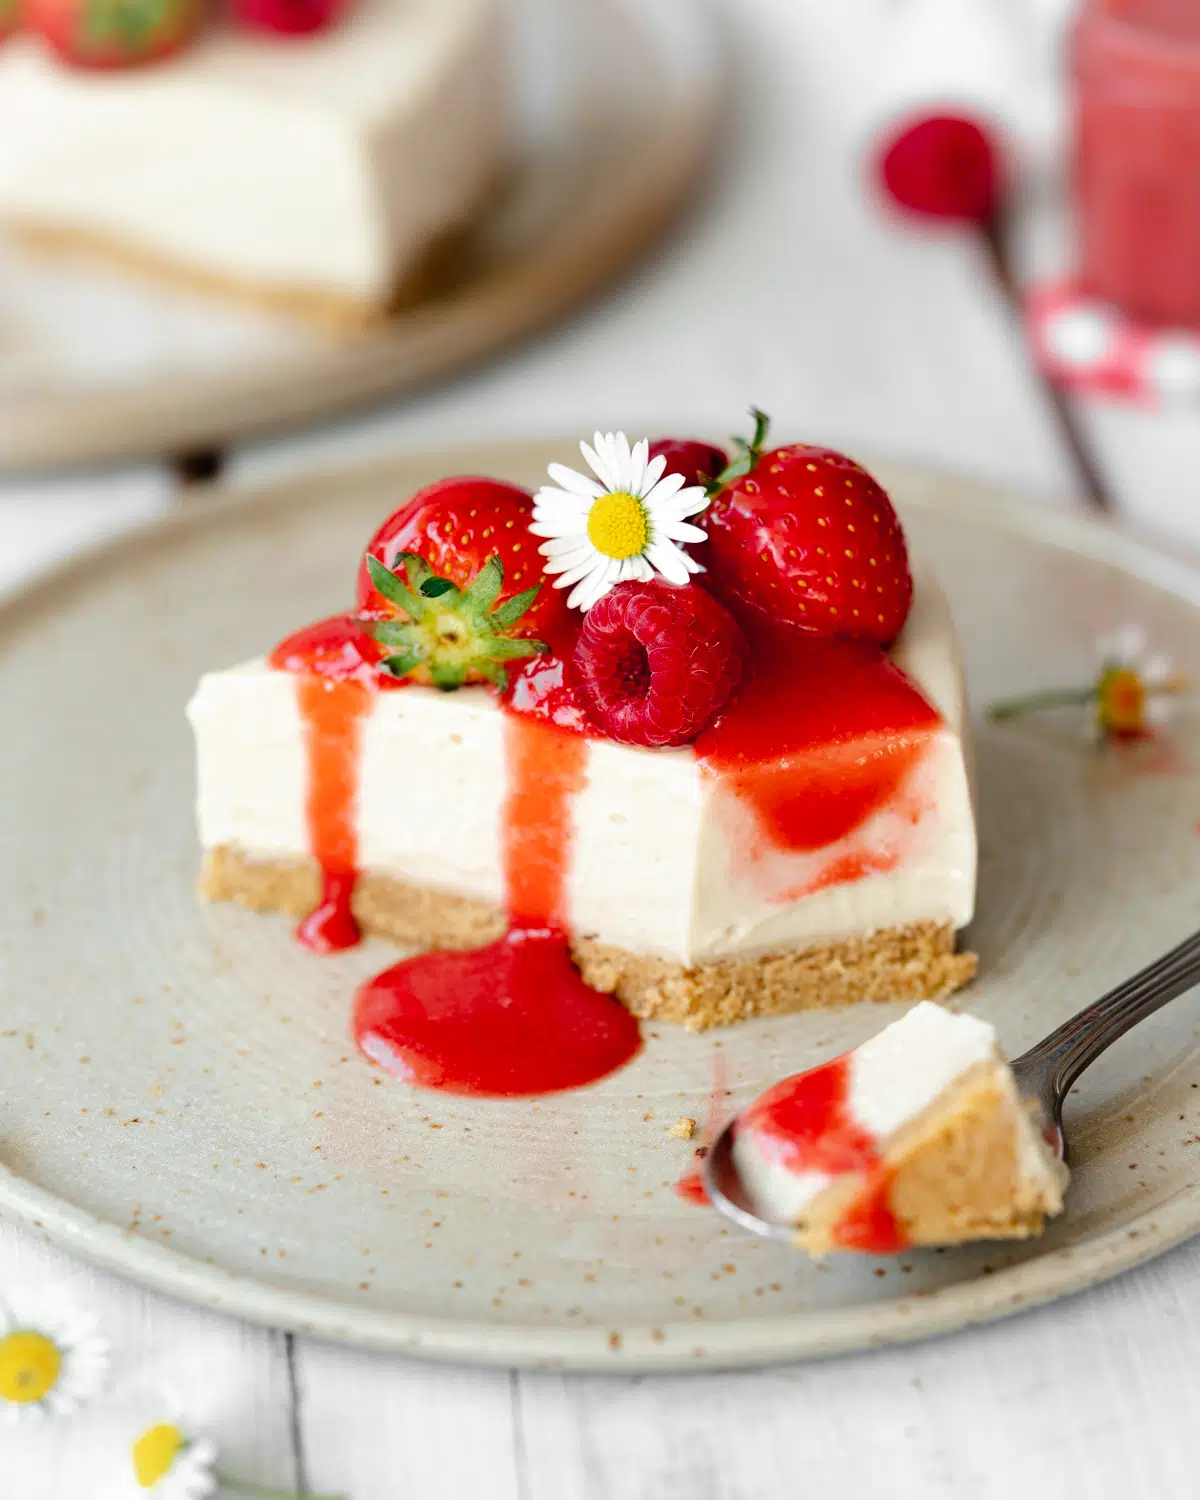 slice of no bake vegan cheesecake on a plate topped with fresh berries and strawberry sauce.